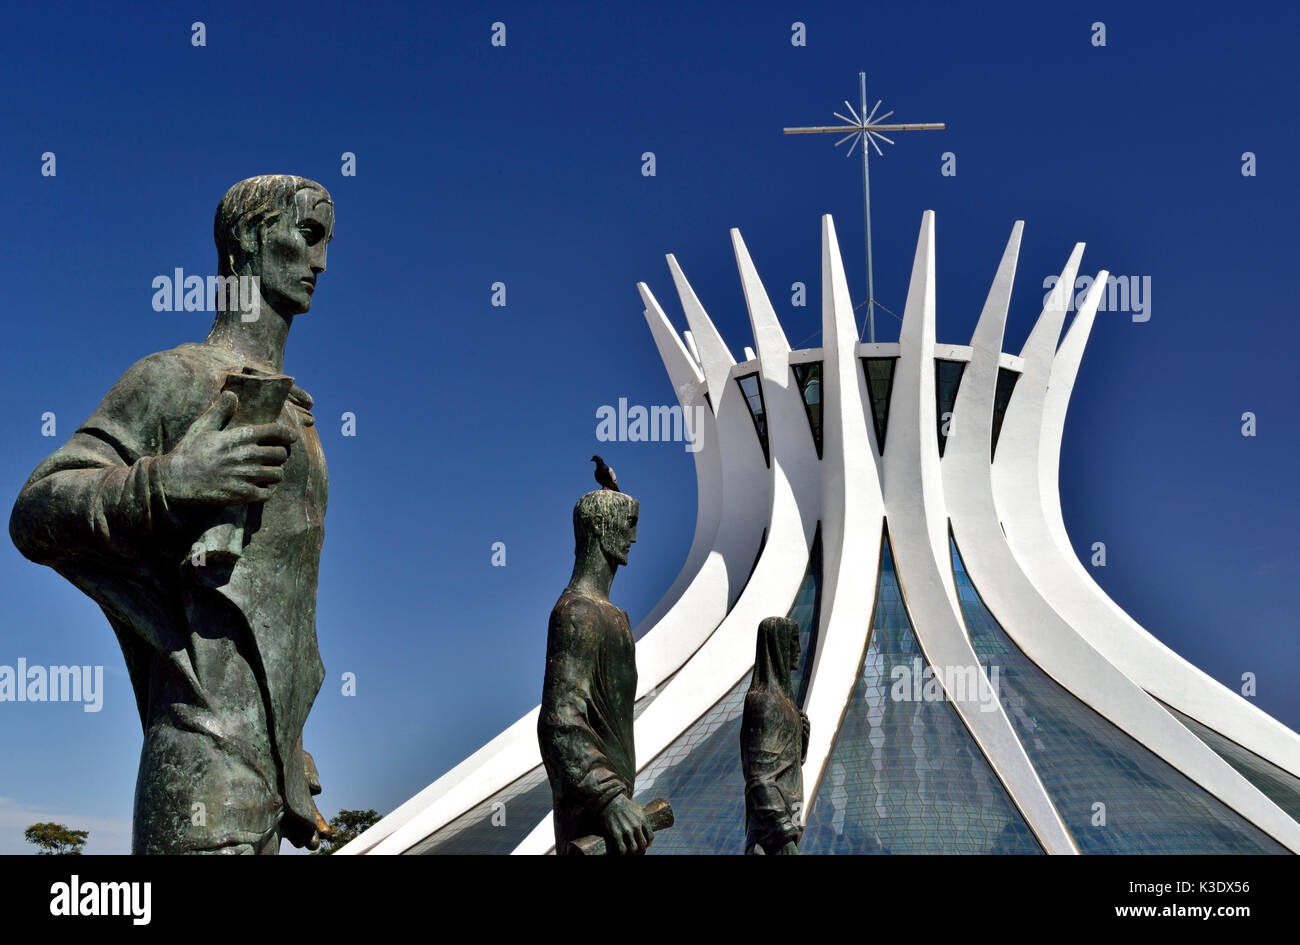 Brazil, Brazil, cathedral Nossa Senhora Aparecida with evangelists statues in front of it, designed by Oscar Niemeyer, Stock Photo